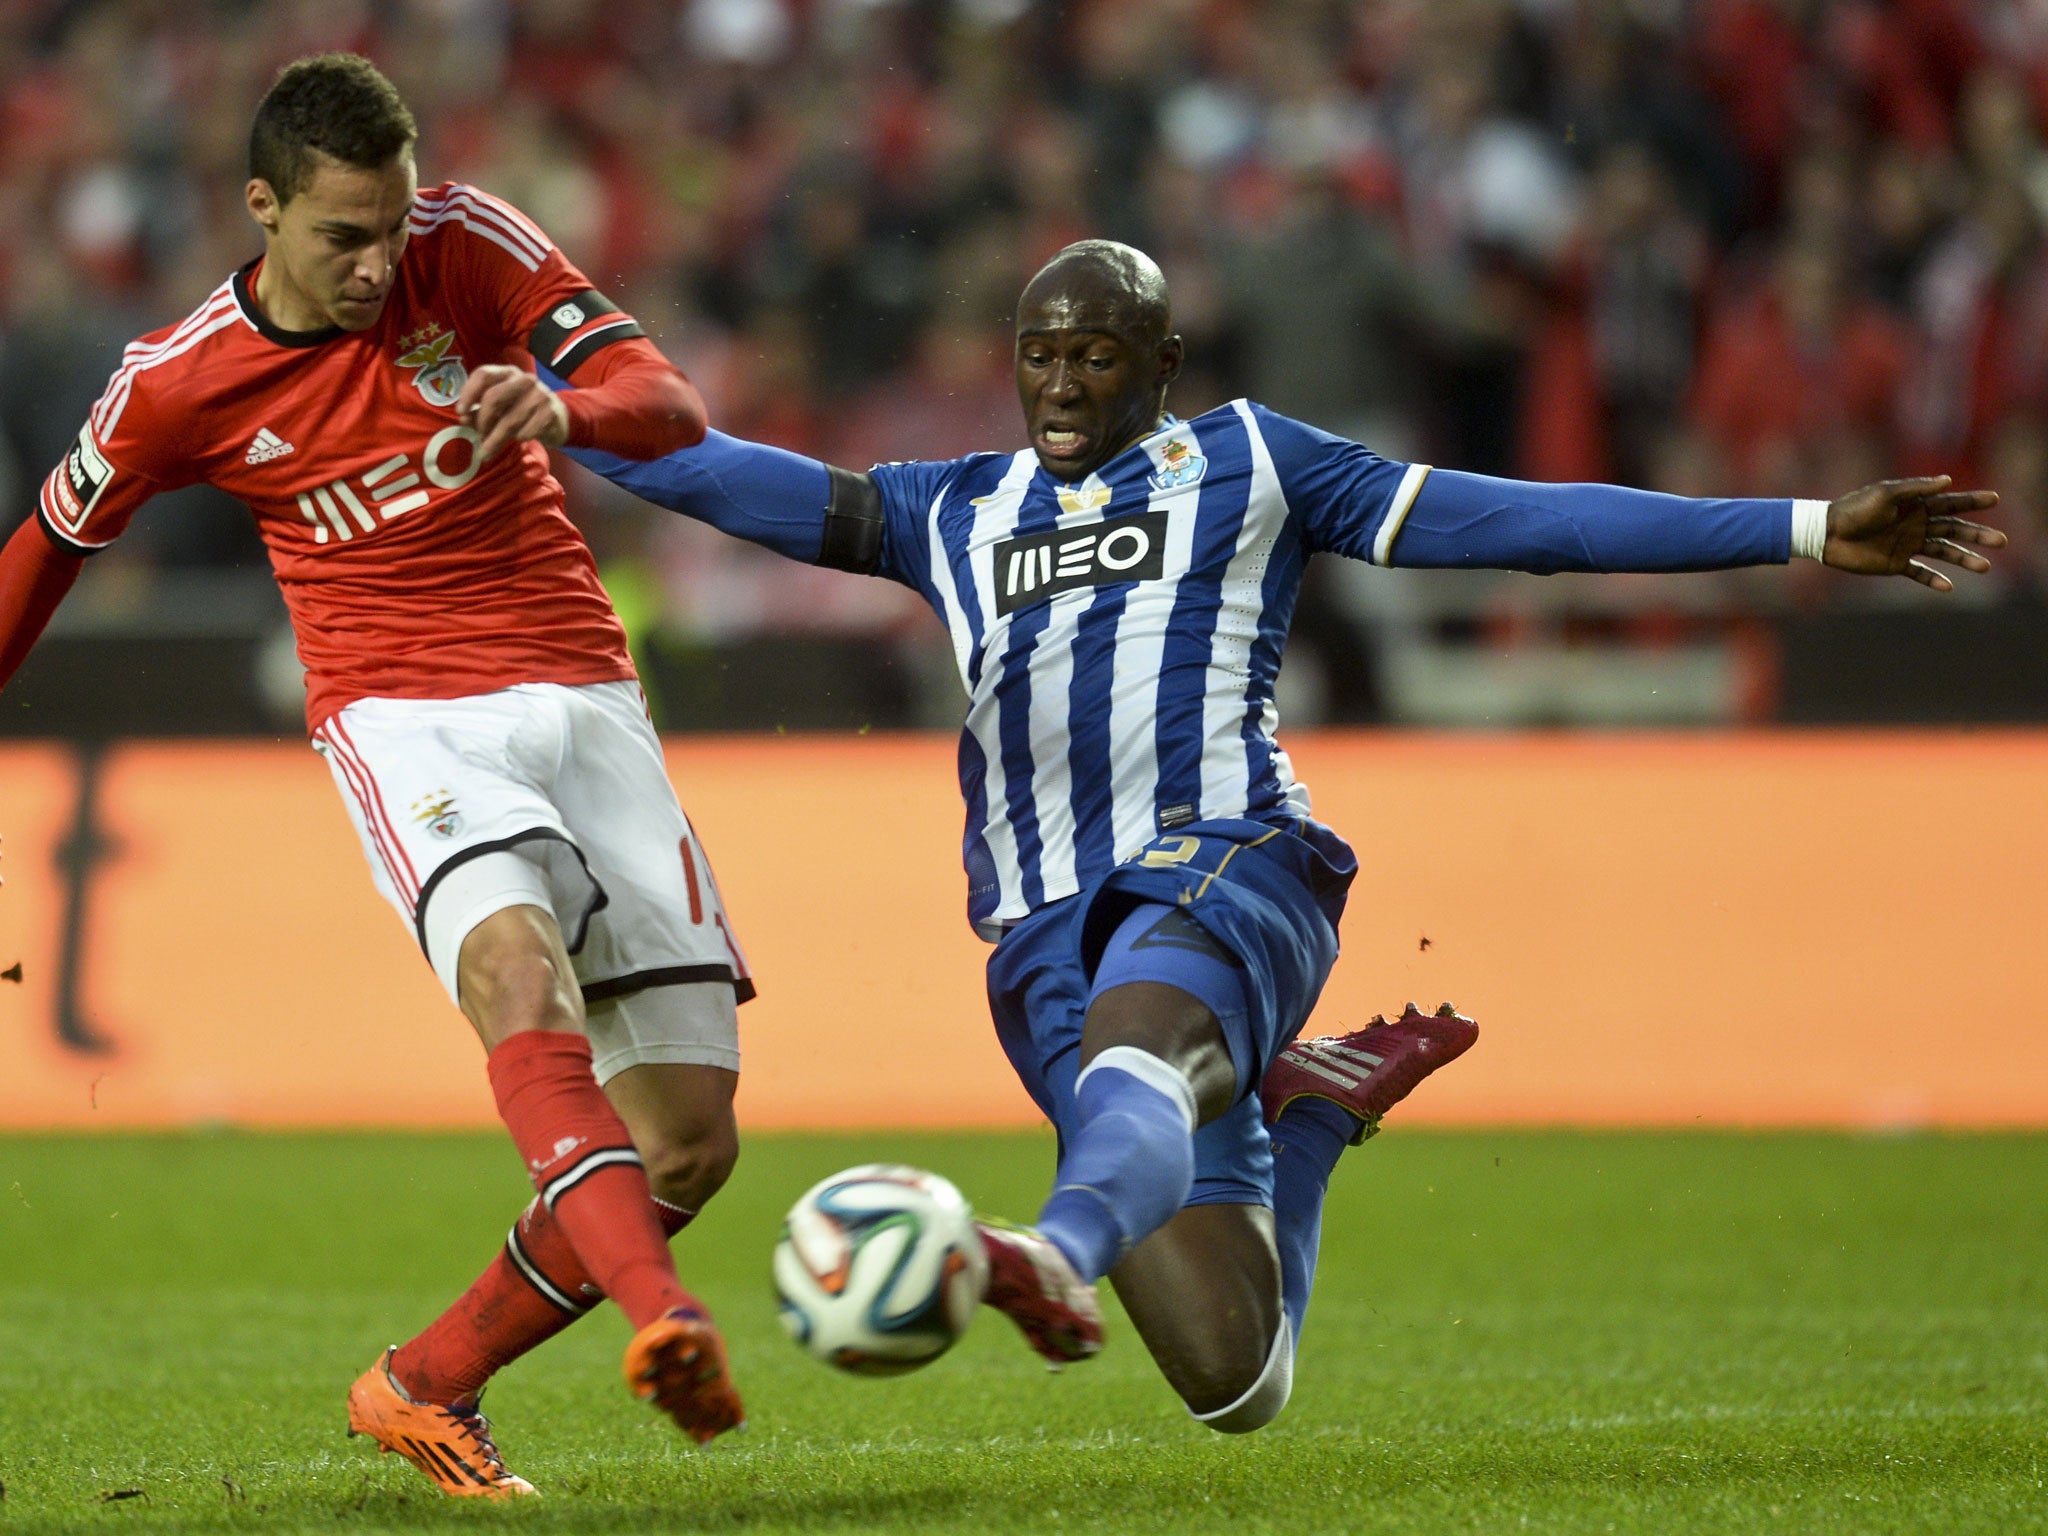 Porto defender Eliaquim Mangala could be the subject of a £35m offer from Arsenal